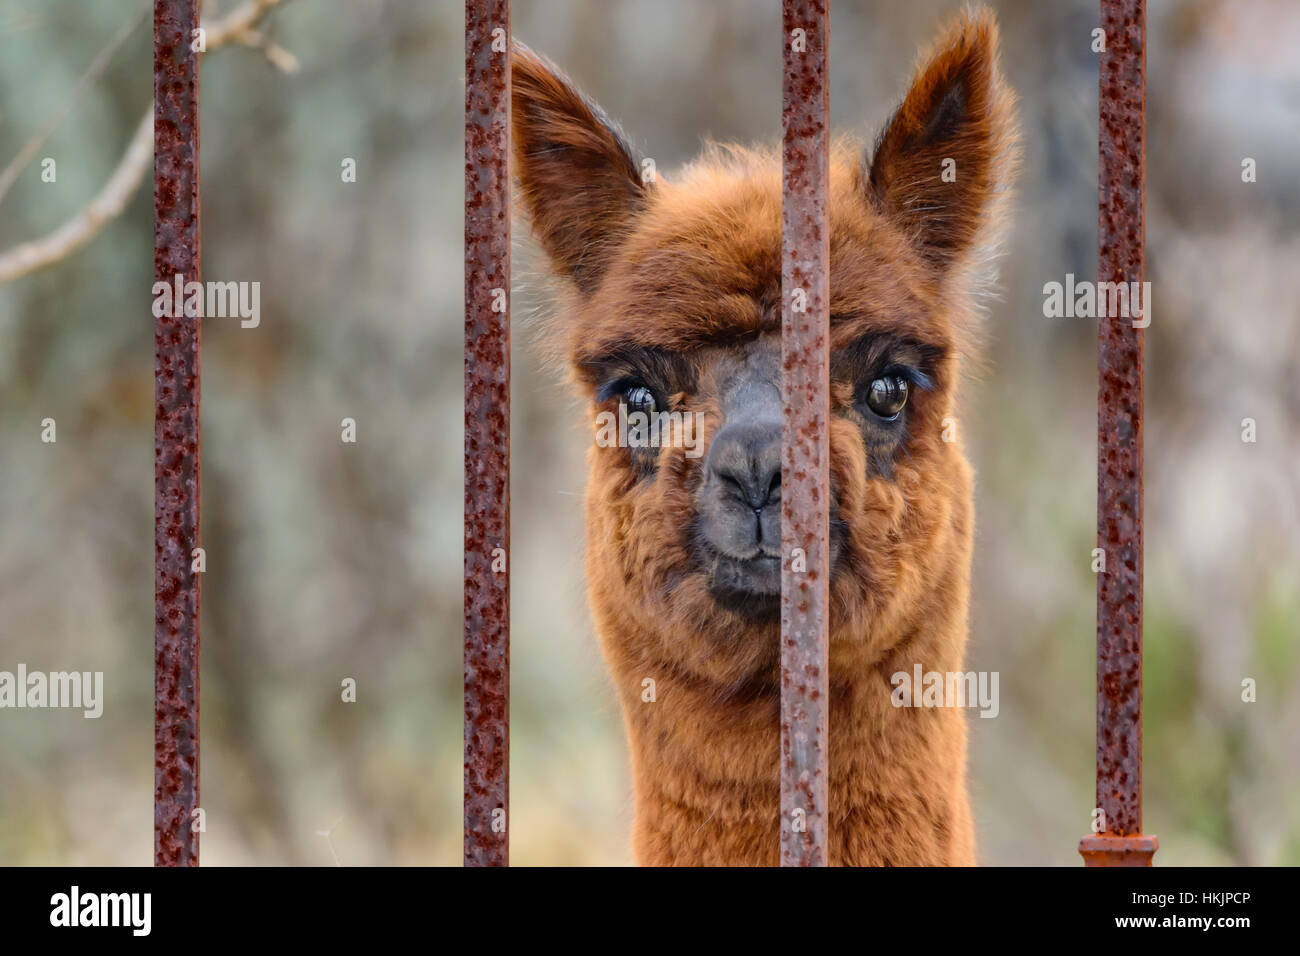 Alpaca (Vicugna pacos) looking out iron fence. Curious, with bright eyes and brown, red fur. Cute Stock Photo